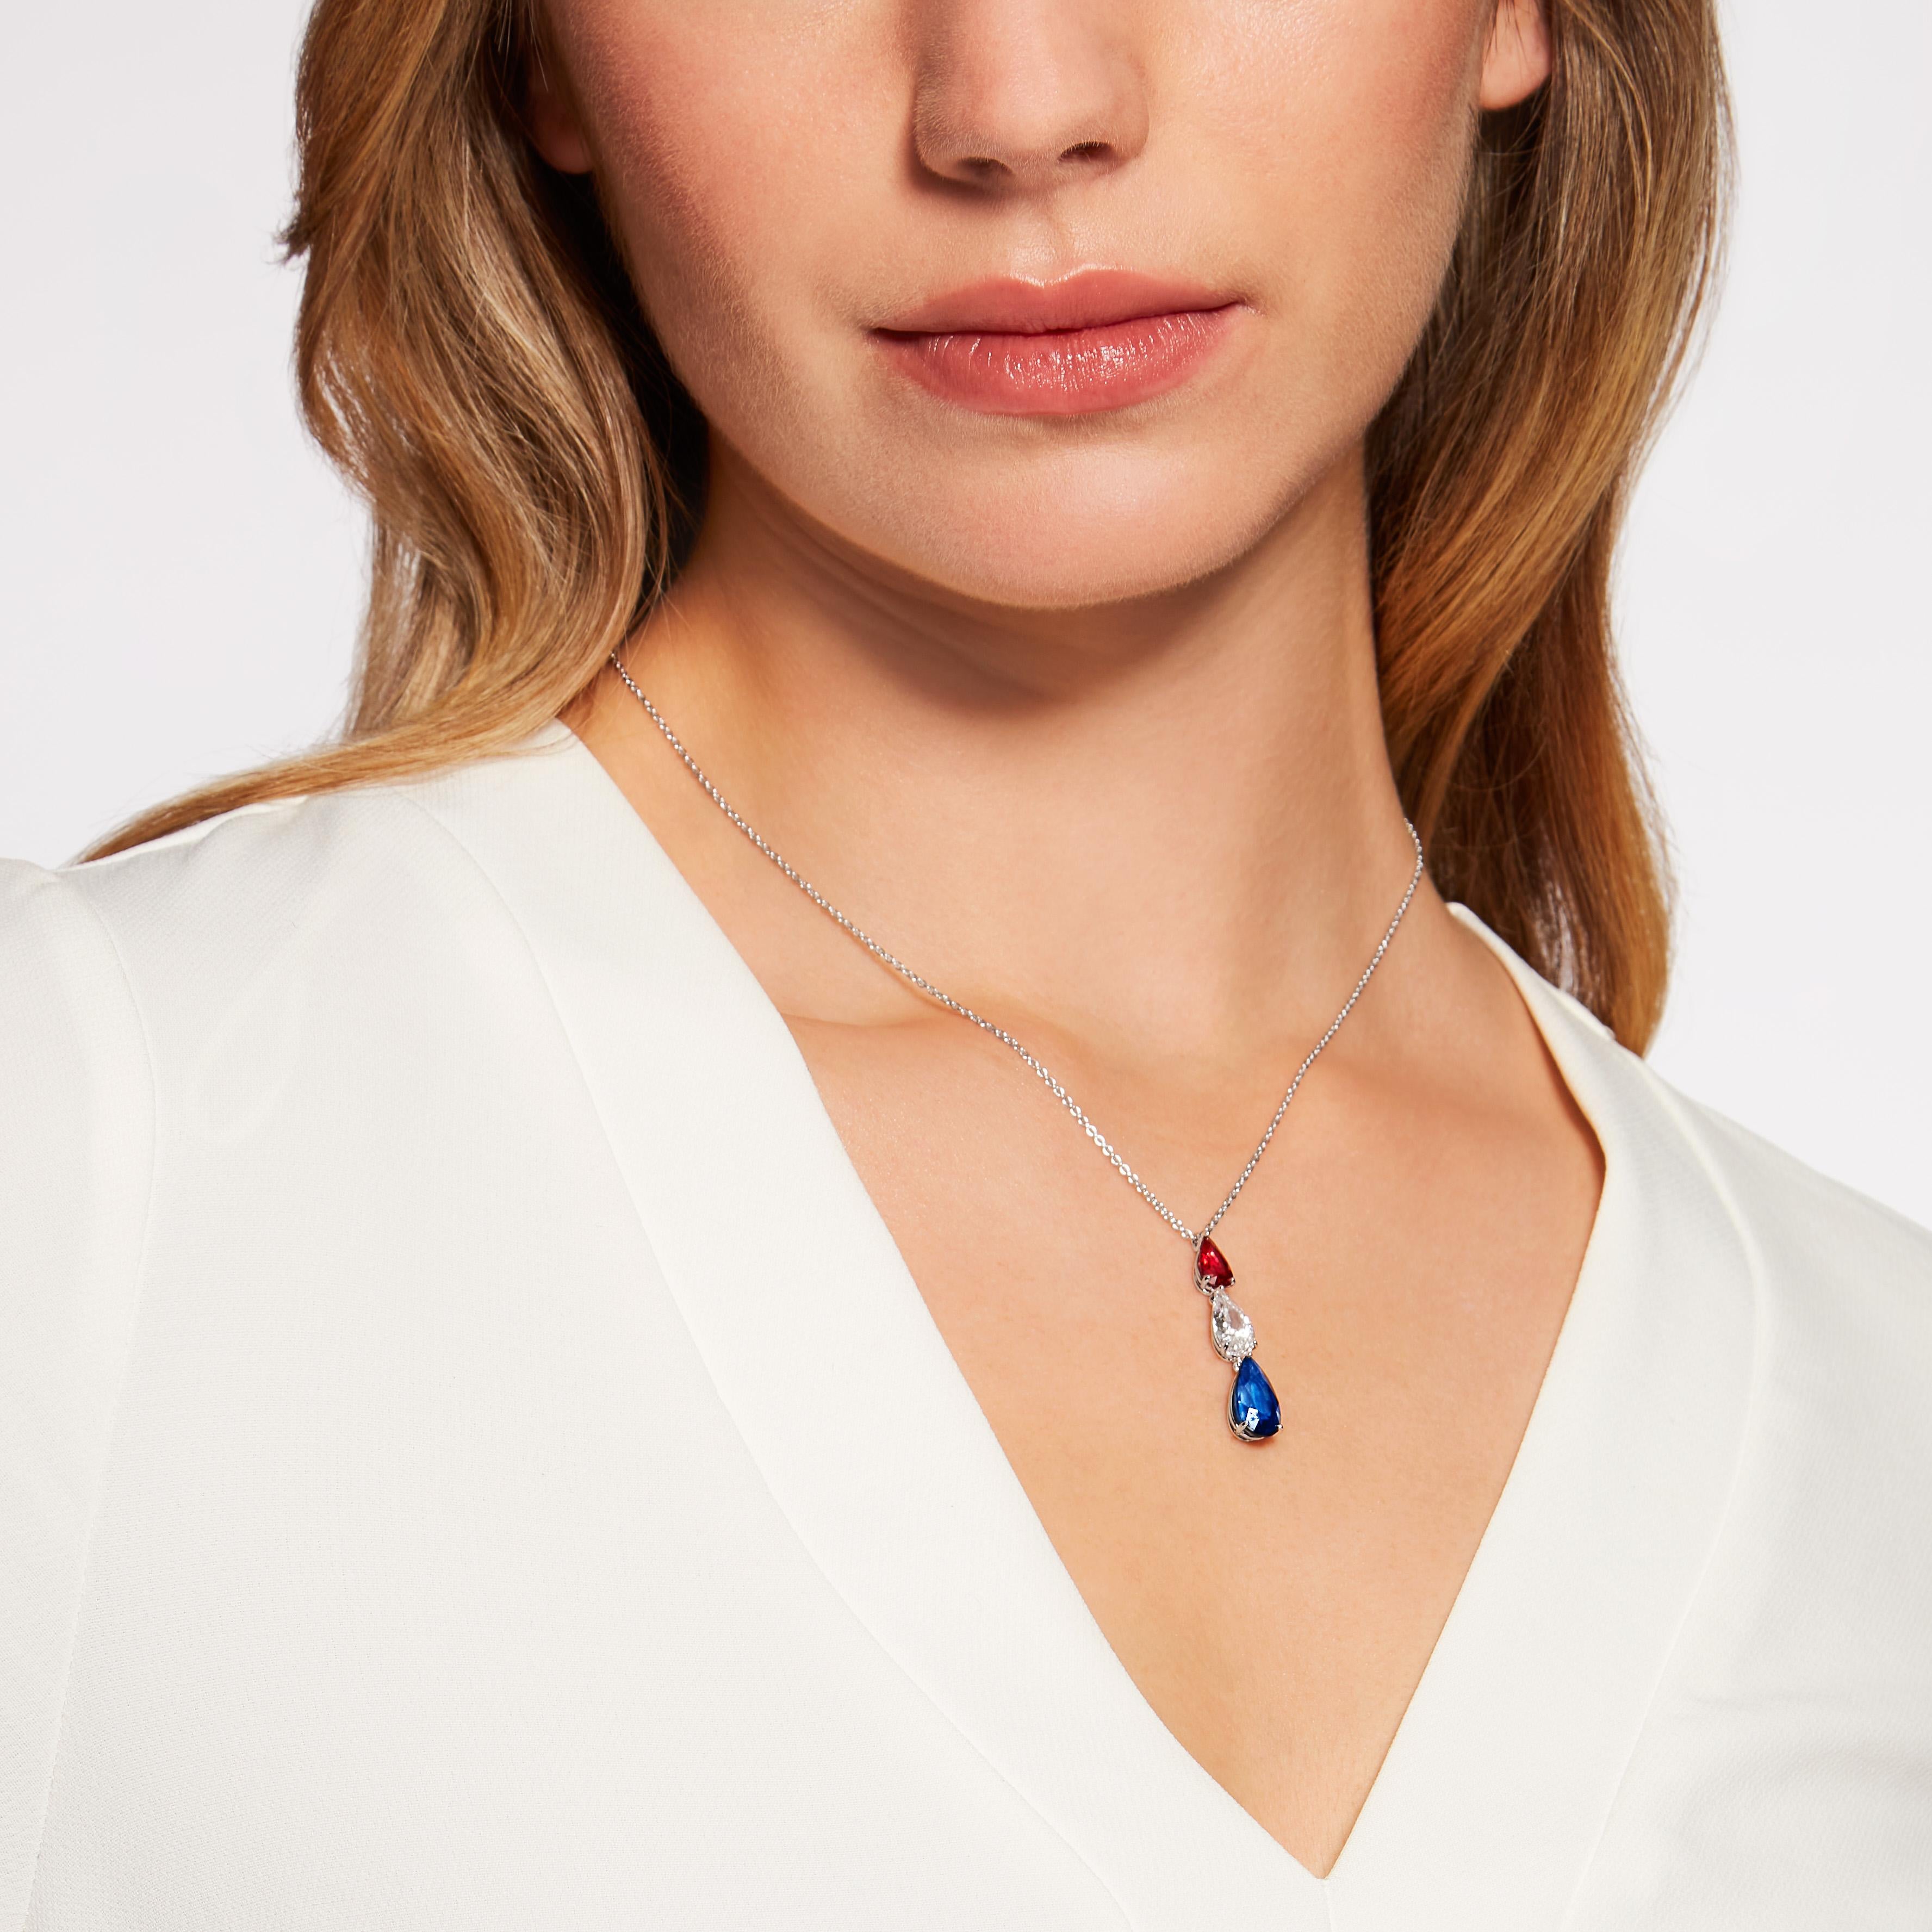 Ruby reds, white diamonds and sapphire blues – the Hirsh atelier have created a few special pieces in Britannia colours inspired by Her Majesty Queen Elizabeth II, created on her platinum jubilee year.

The Britannia Trilogy pendant features a pear